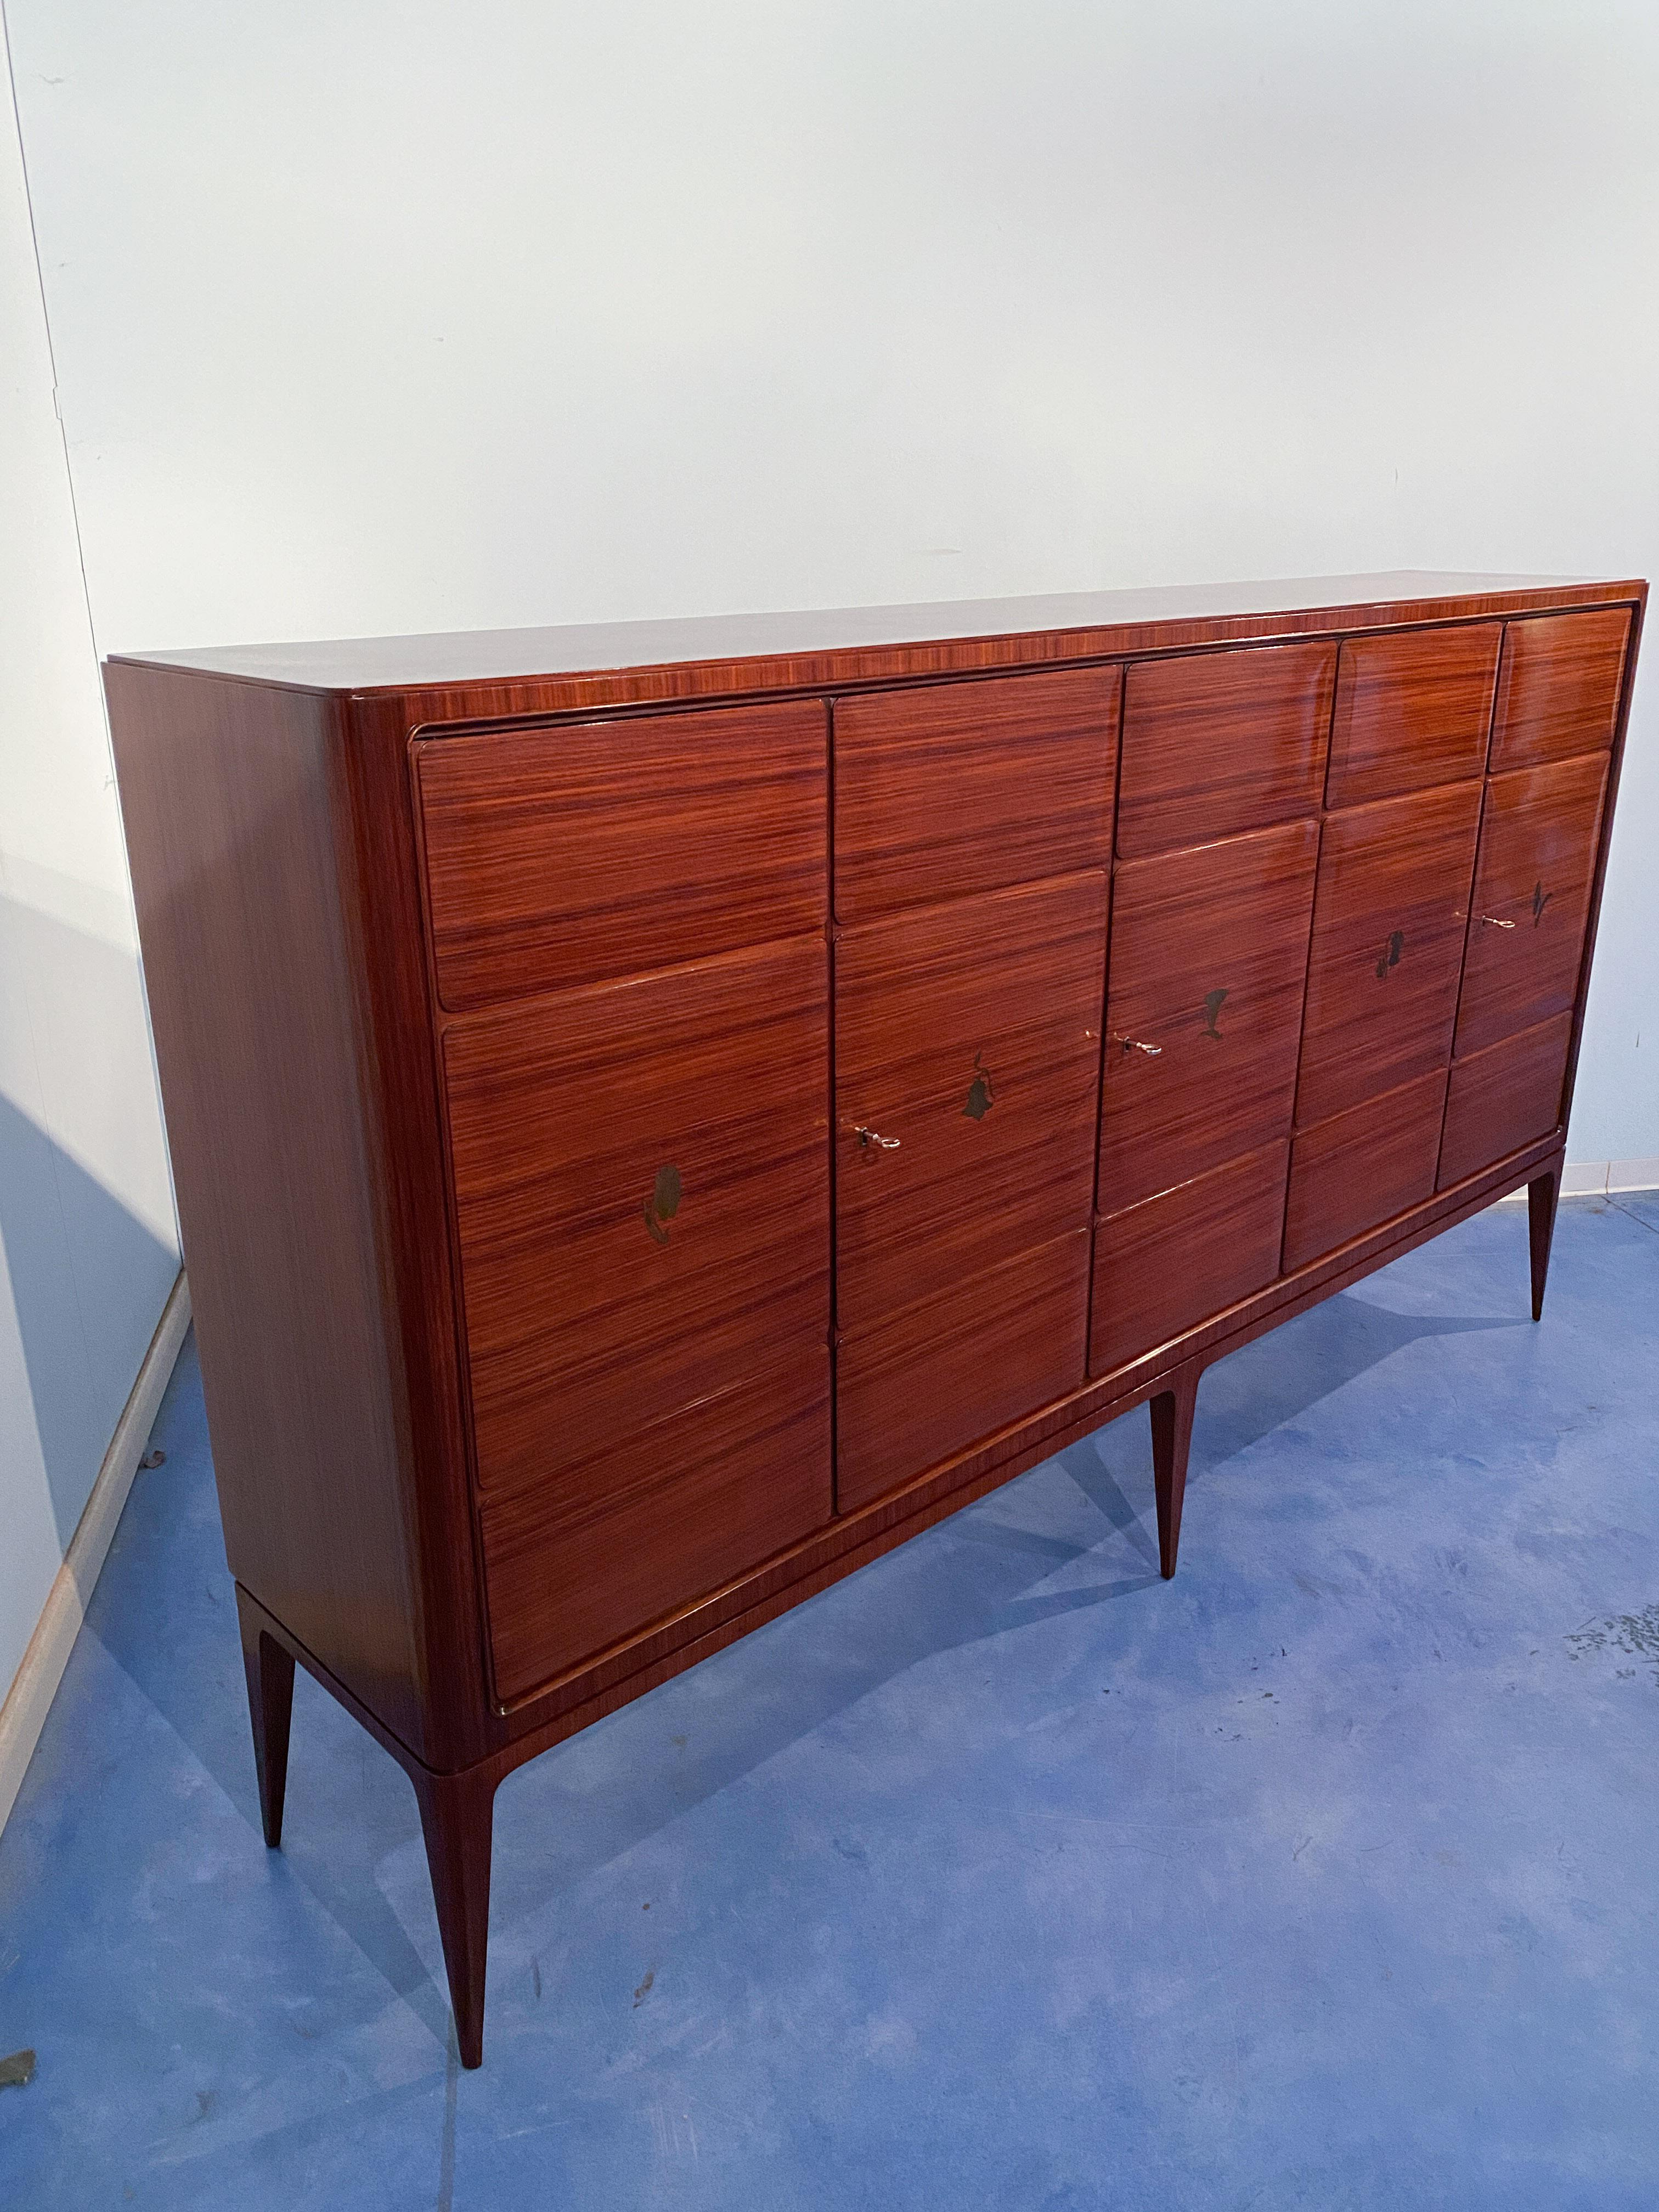 Italian Mid-Century Modern Tall Sideboard Cabinet Designed by Paolo Buffa, 1950 For Sale 13